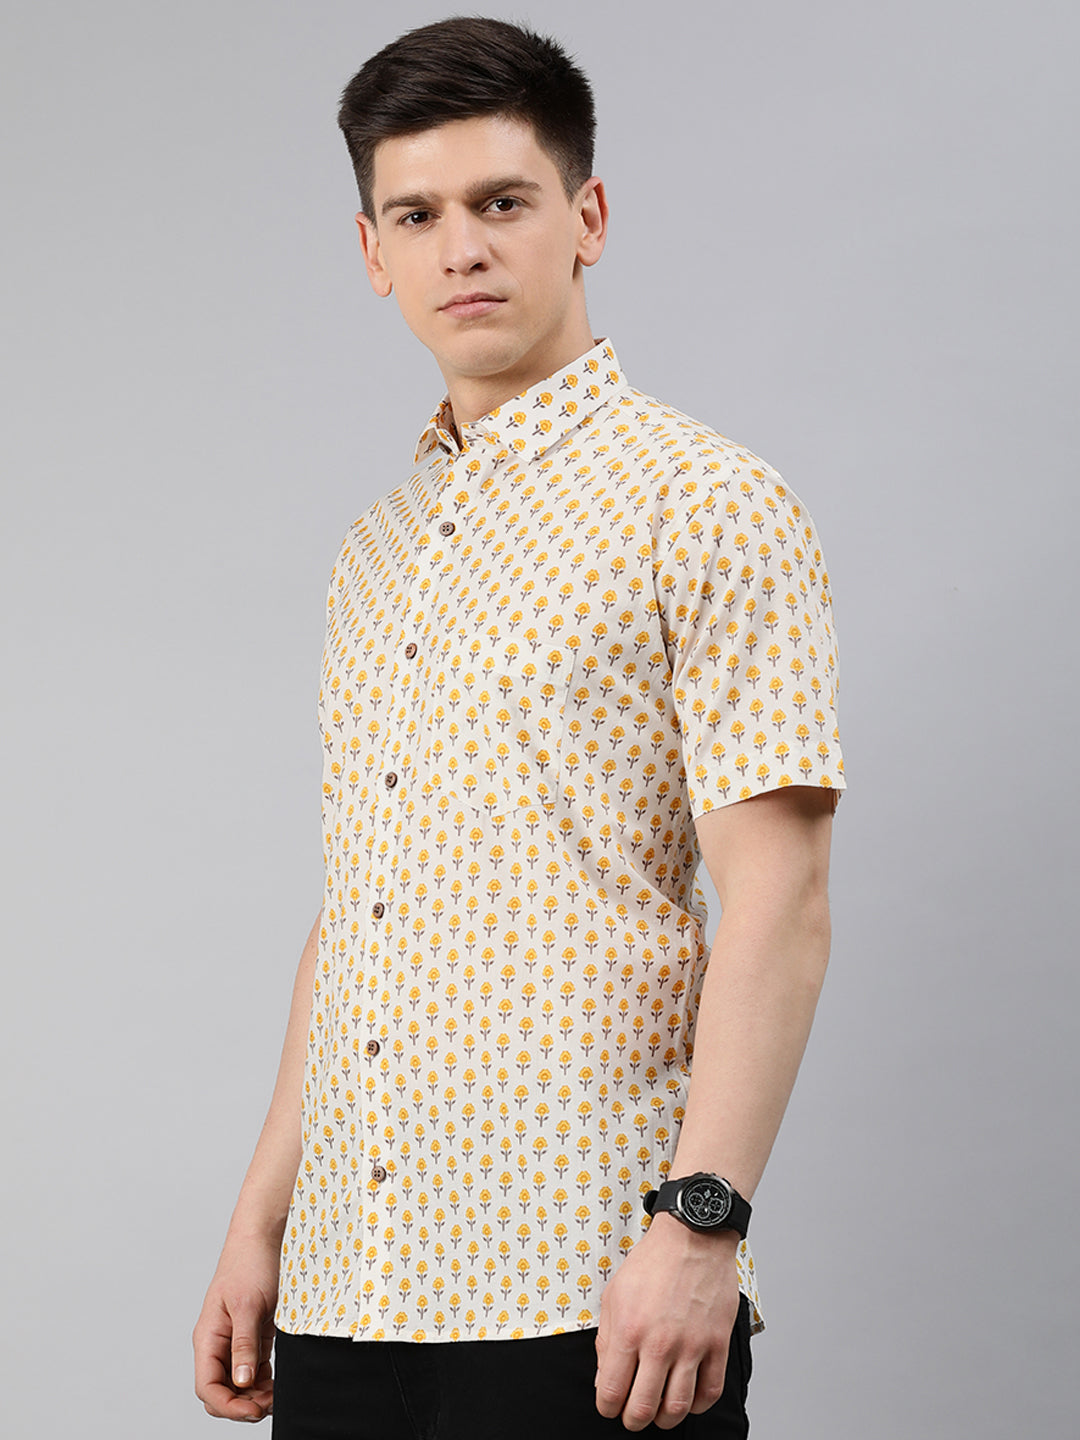 White Cotton Short Sleeves Shirts For Men